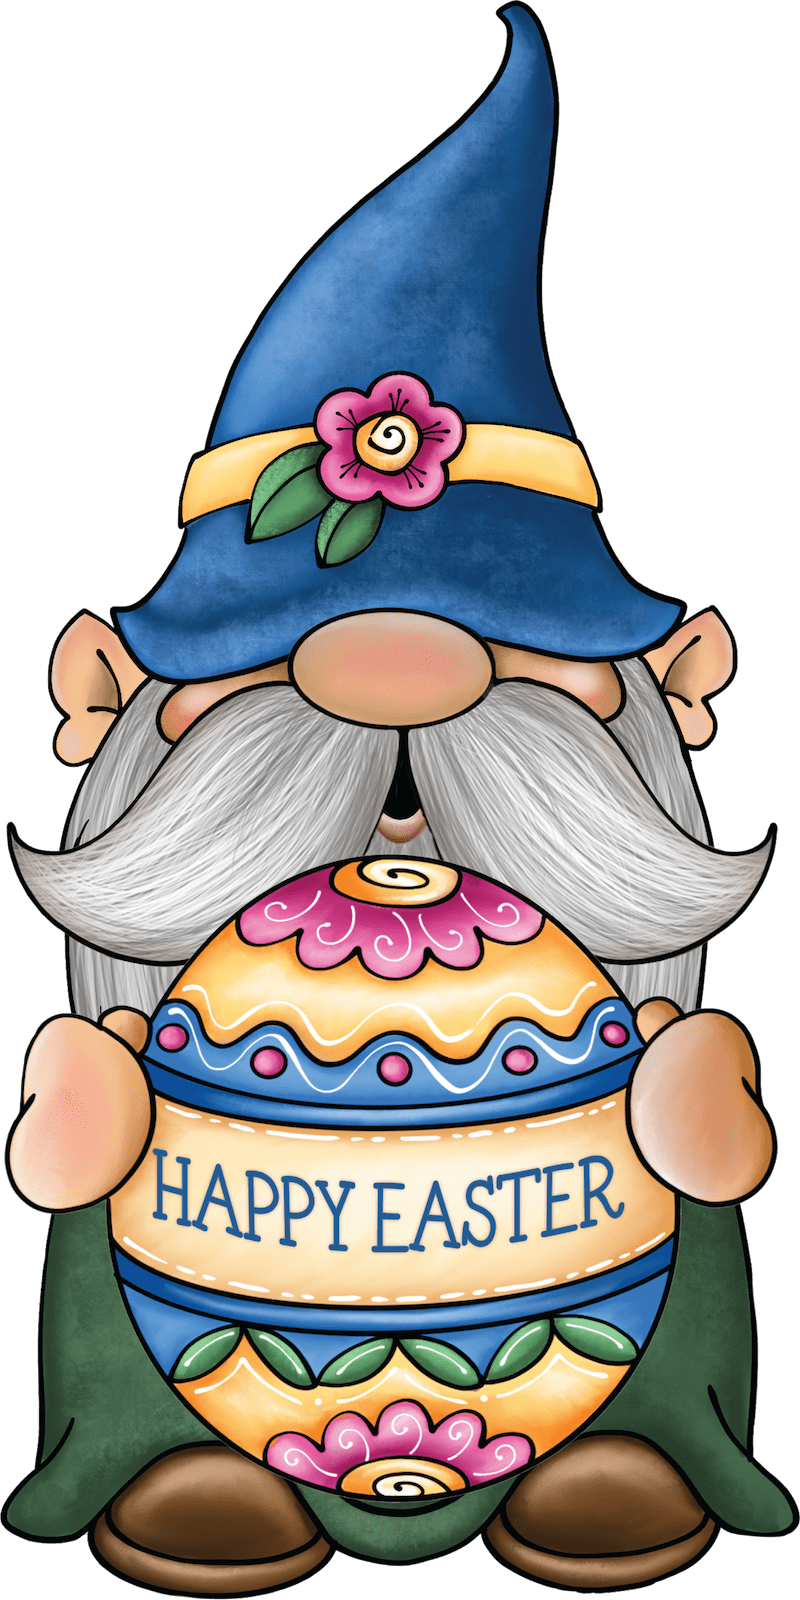 Happy Easter Gnome yard sign Decoration